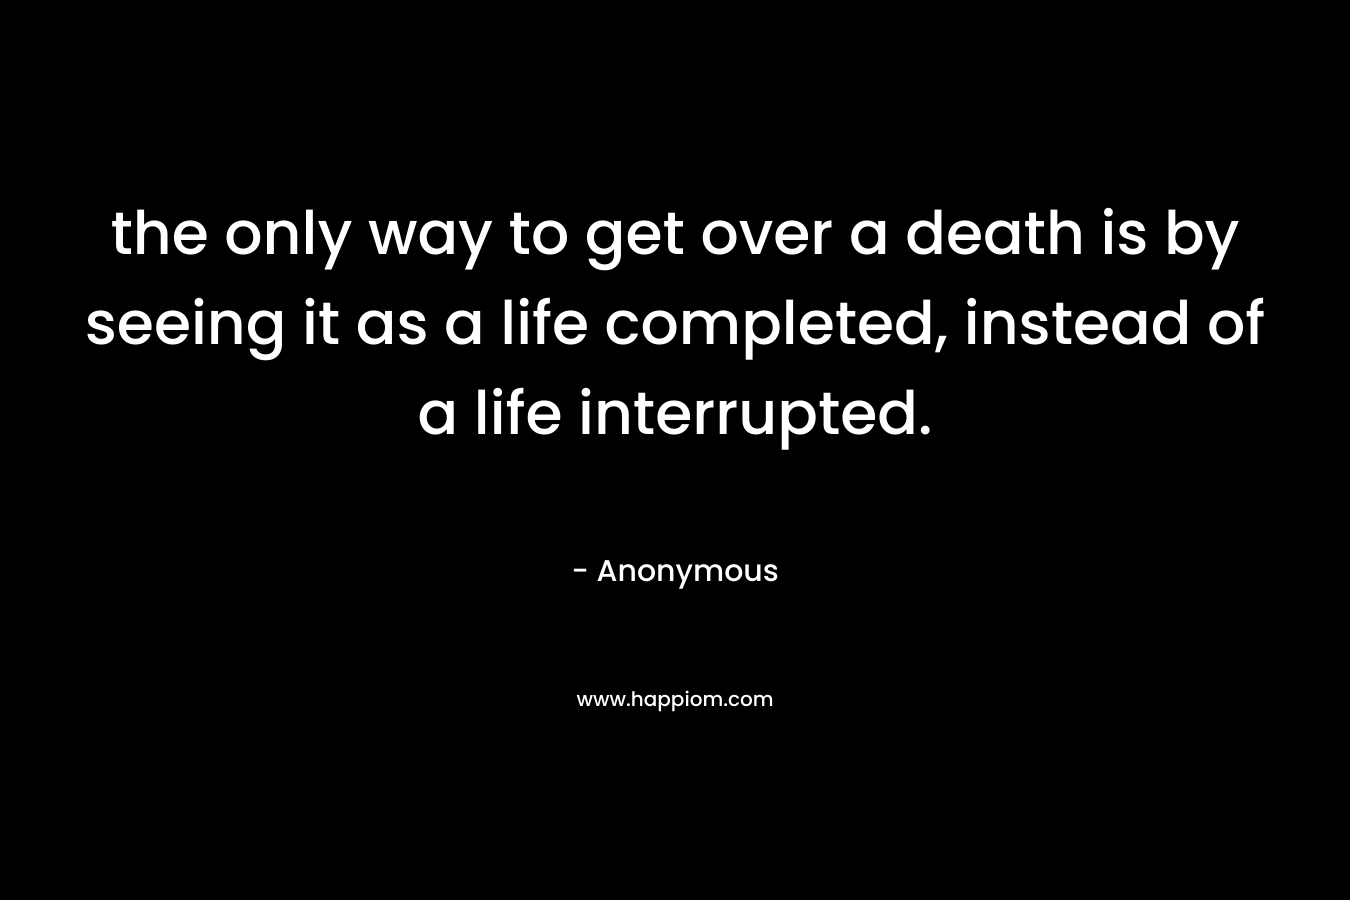 the only way to get over a death is by seeing it as a life completed, instead of a life interrupted.